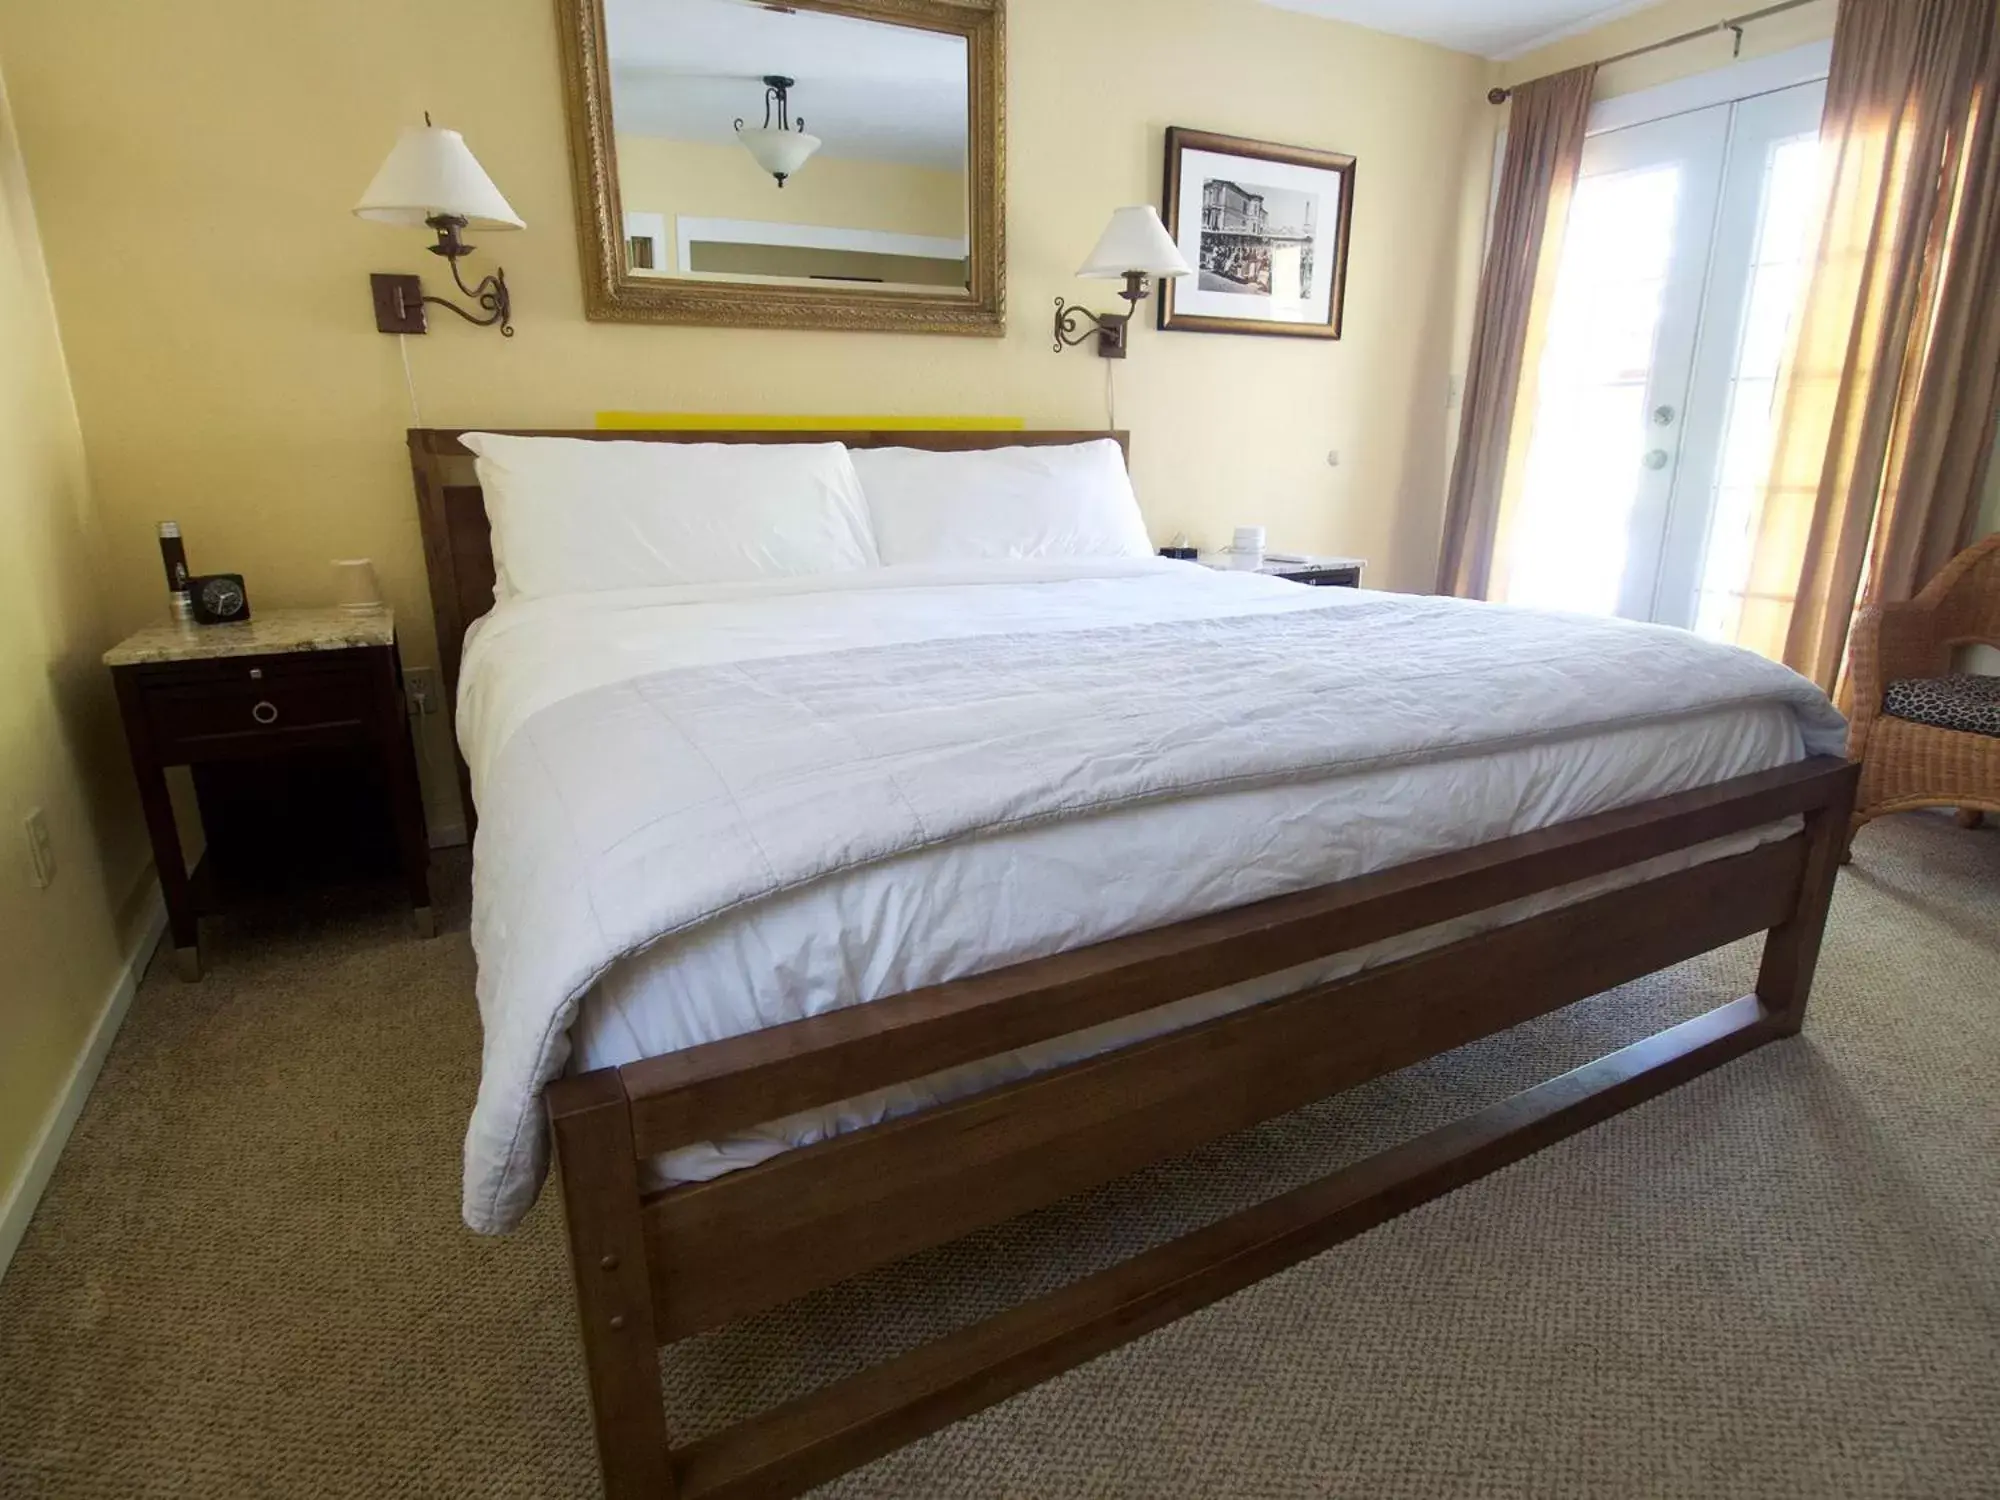 Bed in Mine and Farm, The Inn at Guerneville, CA